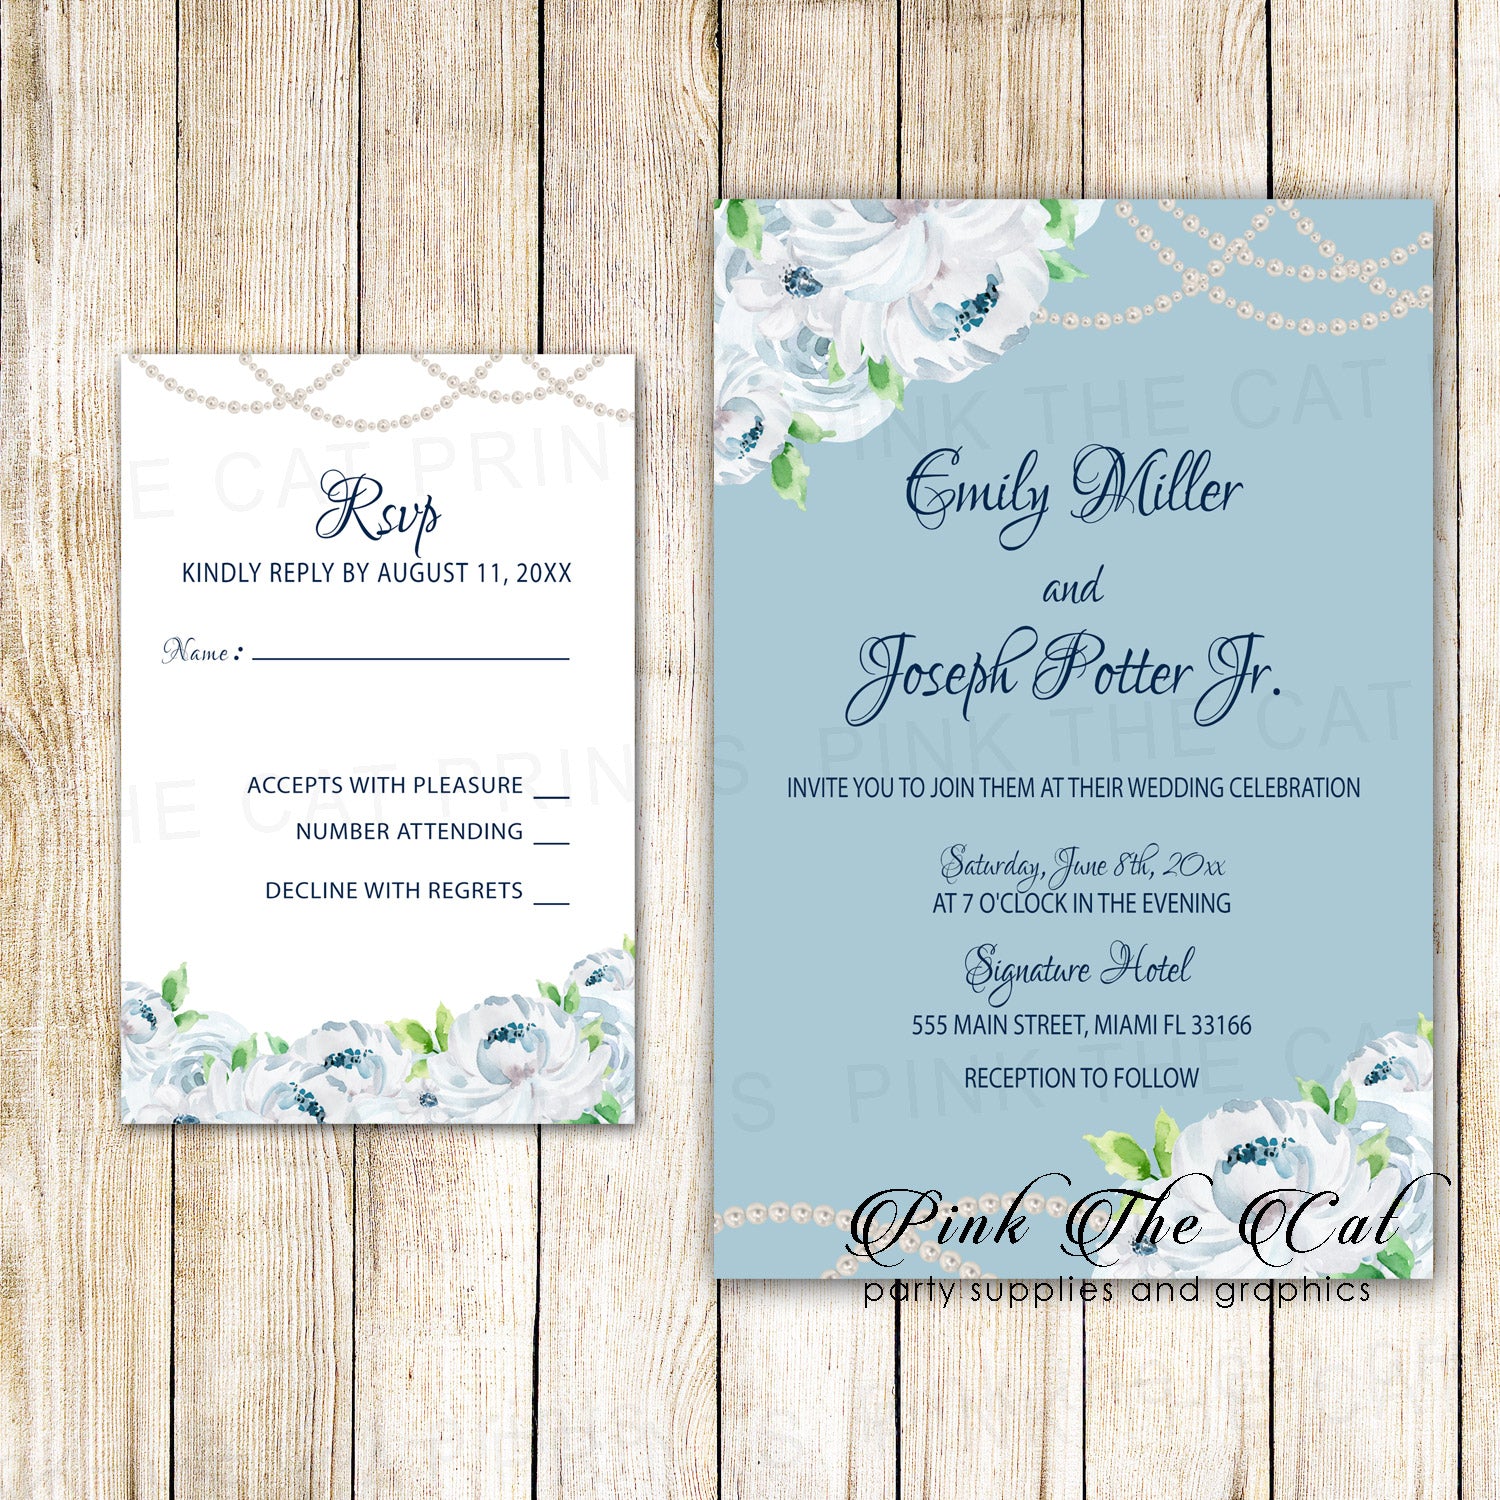 100 Printed Wedding Invitations & RSVP Cards White Roses Pearls Blue